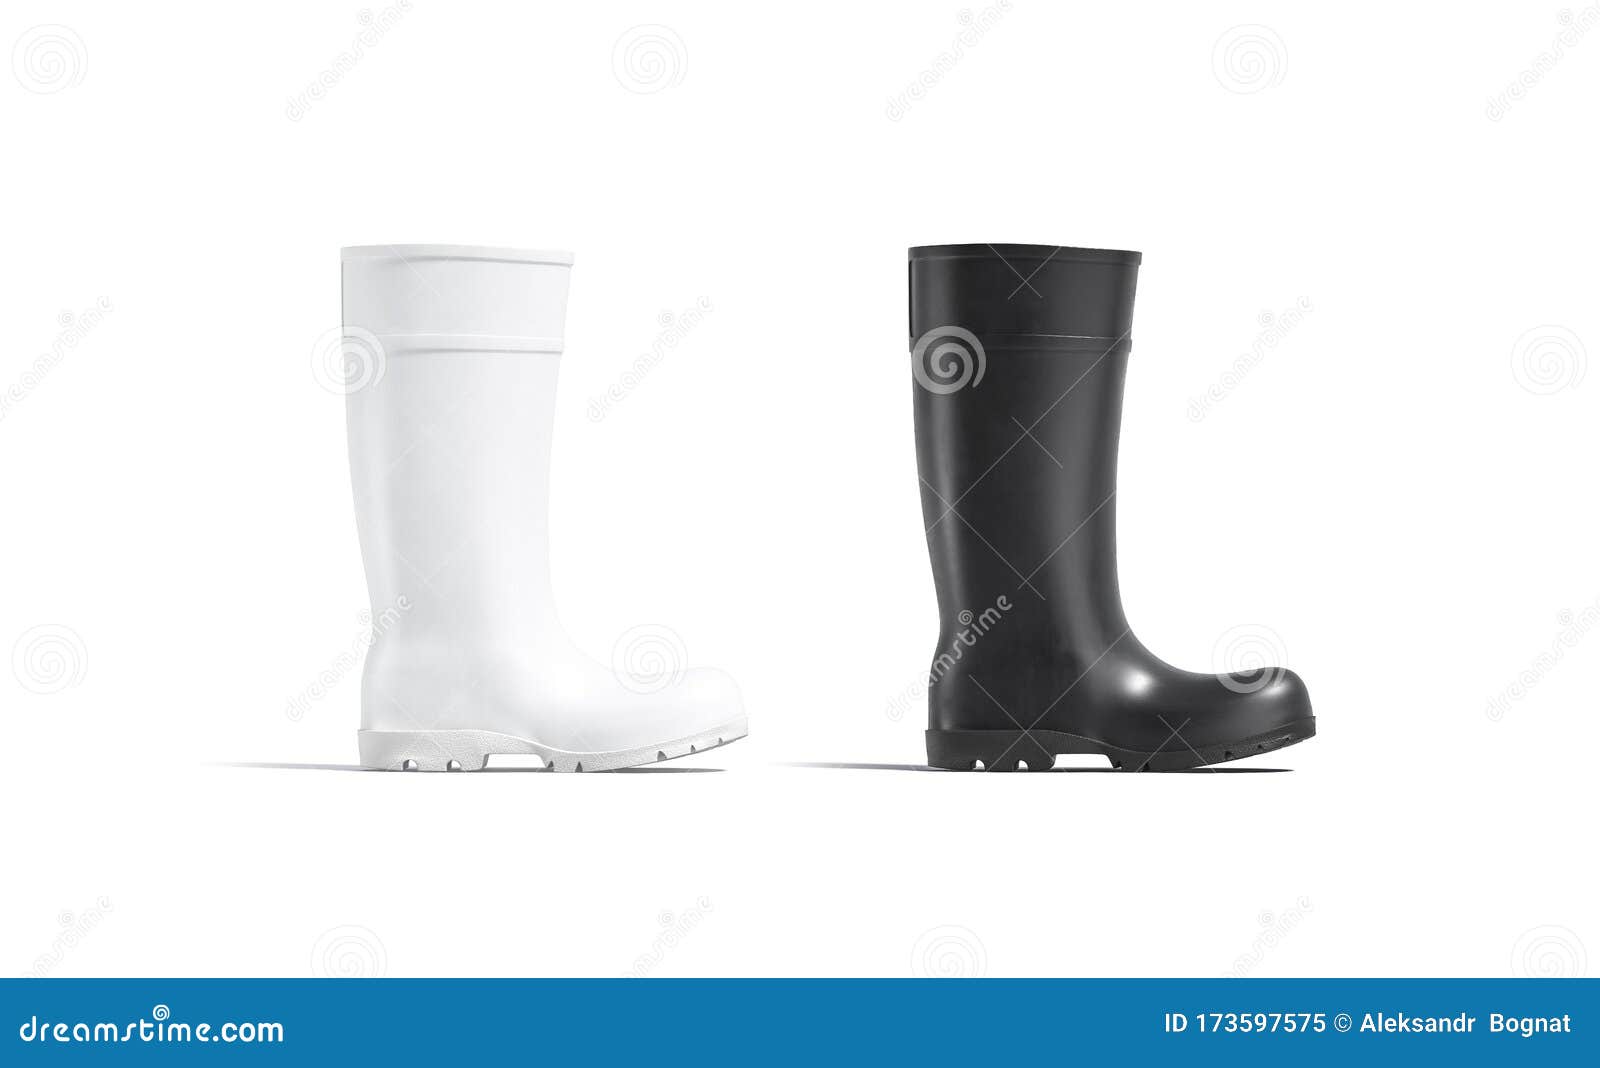 Download Welly Cartoons, Illustrations & Vector Stock Images - 80 ...